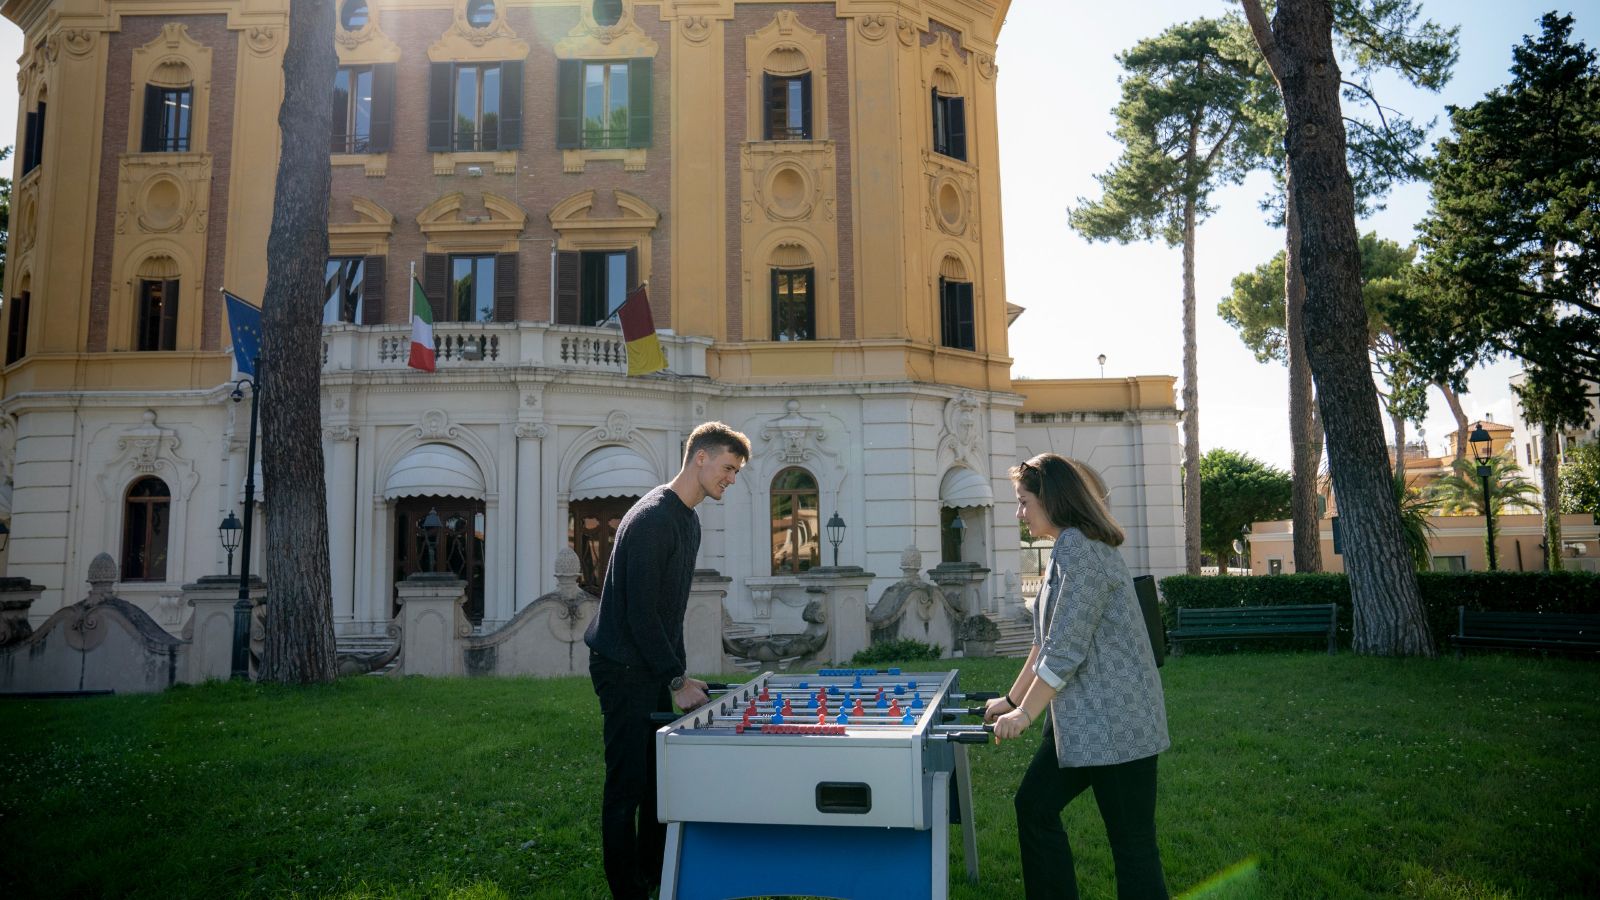 Two students are playing foosball on the lawn outside an old building at LUISS university in Rome.